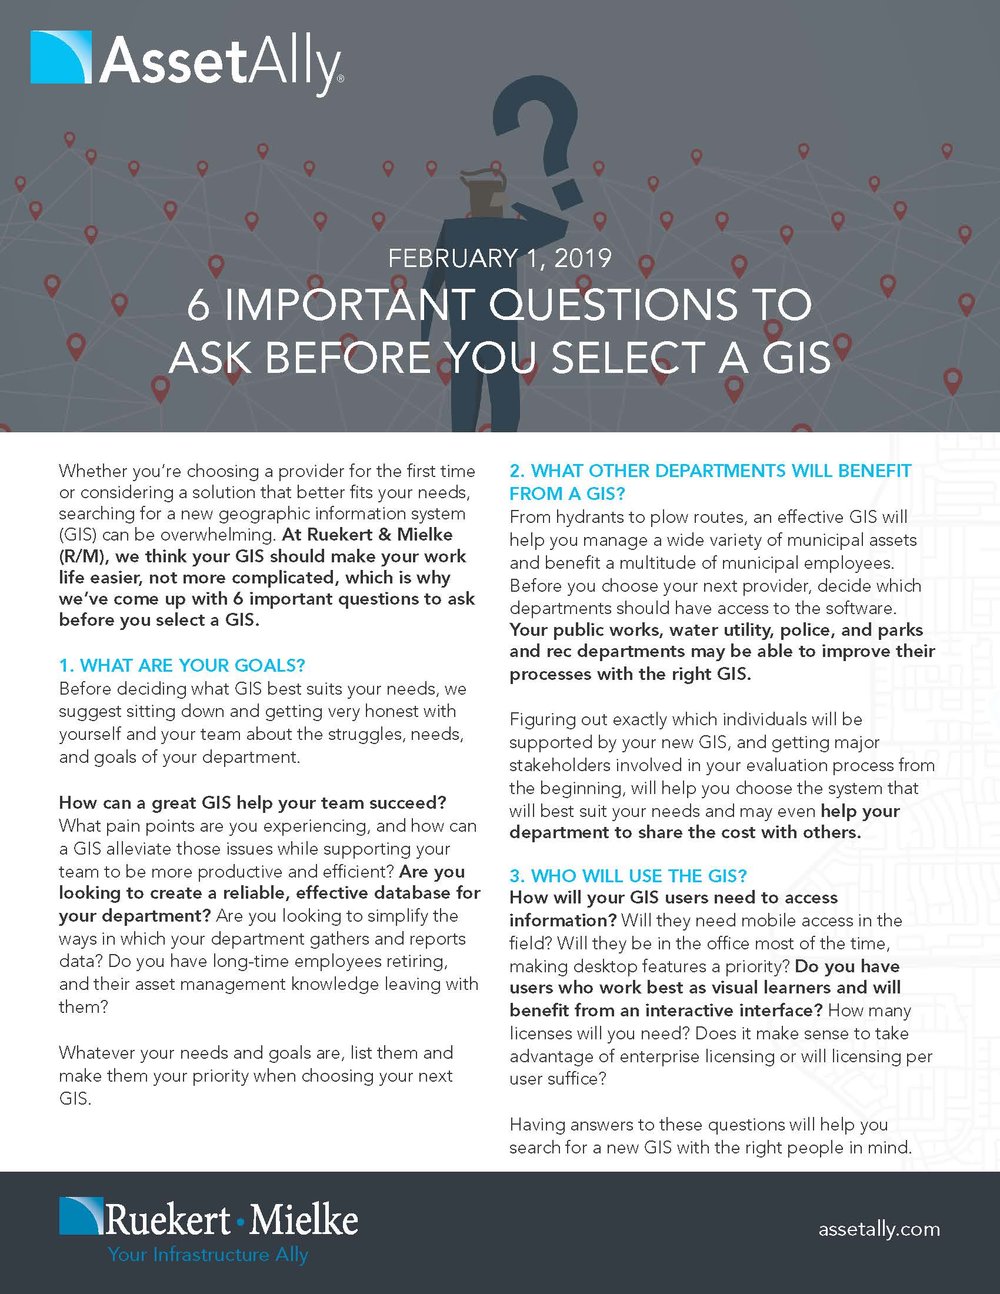 Why did you choose GIS?